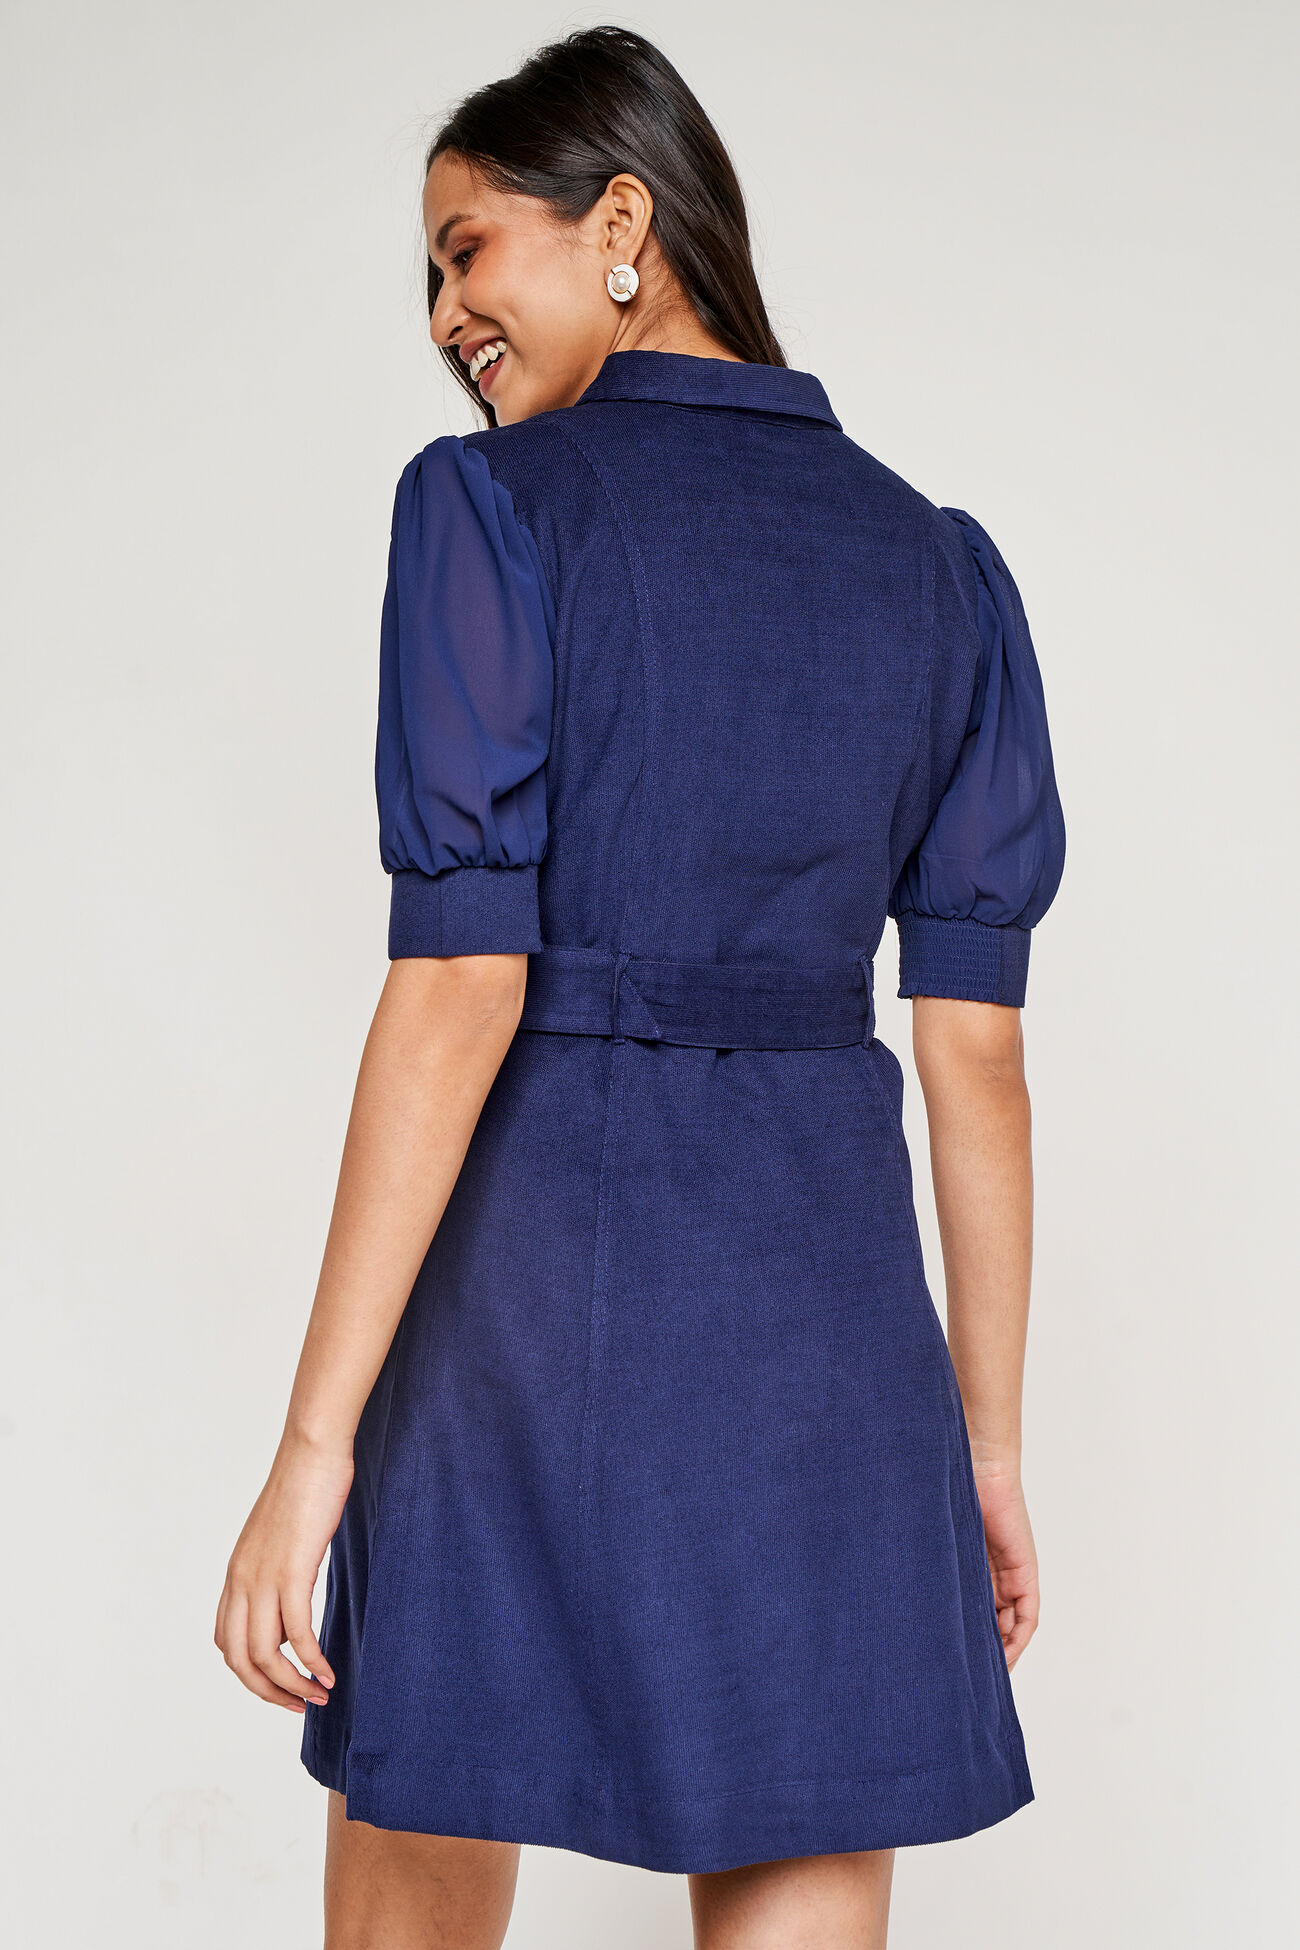 Navy Blue Solid Straight Dress, Navy Blue, image 2